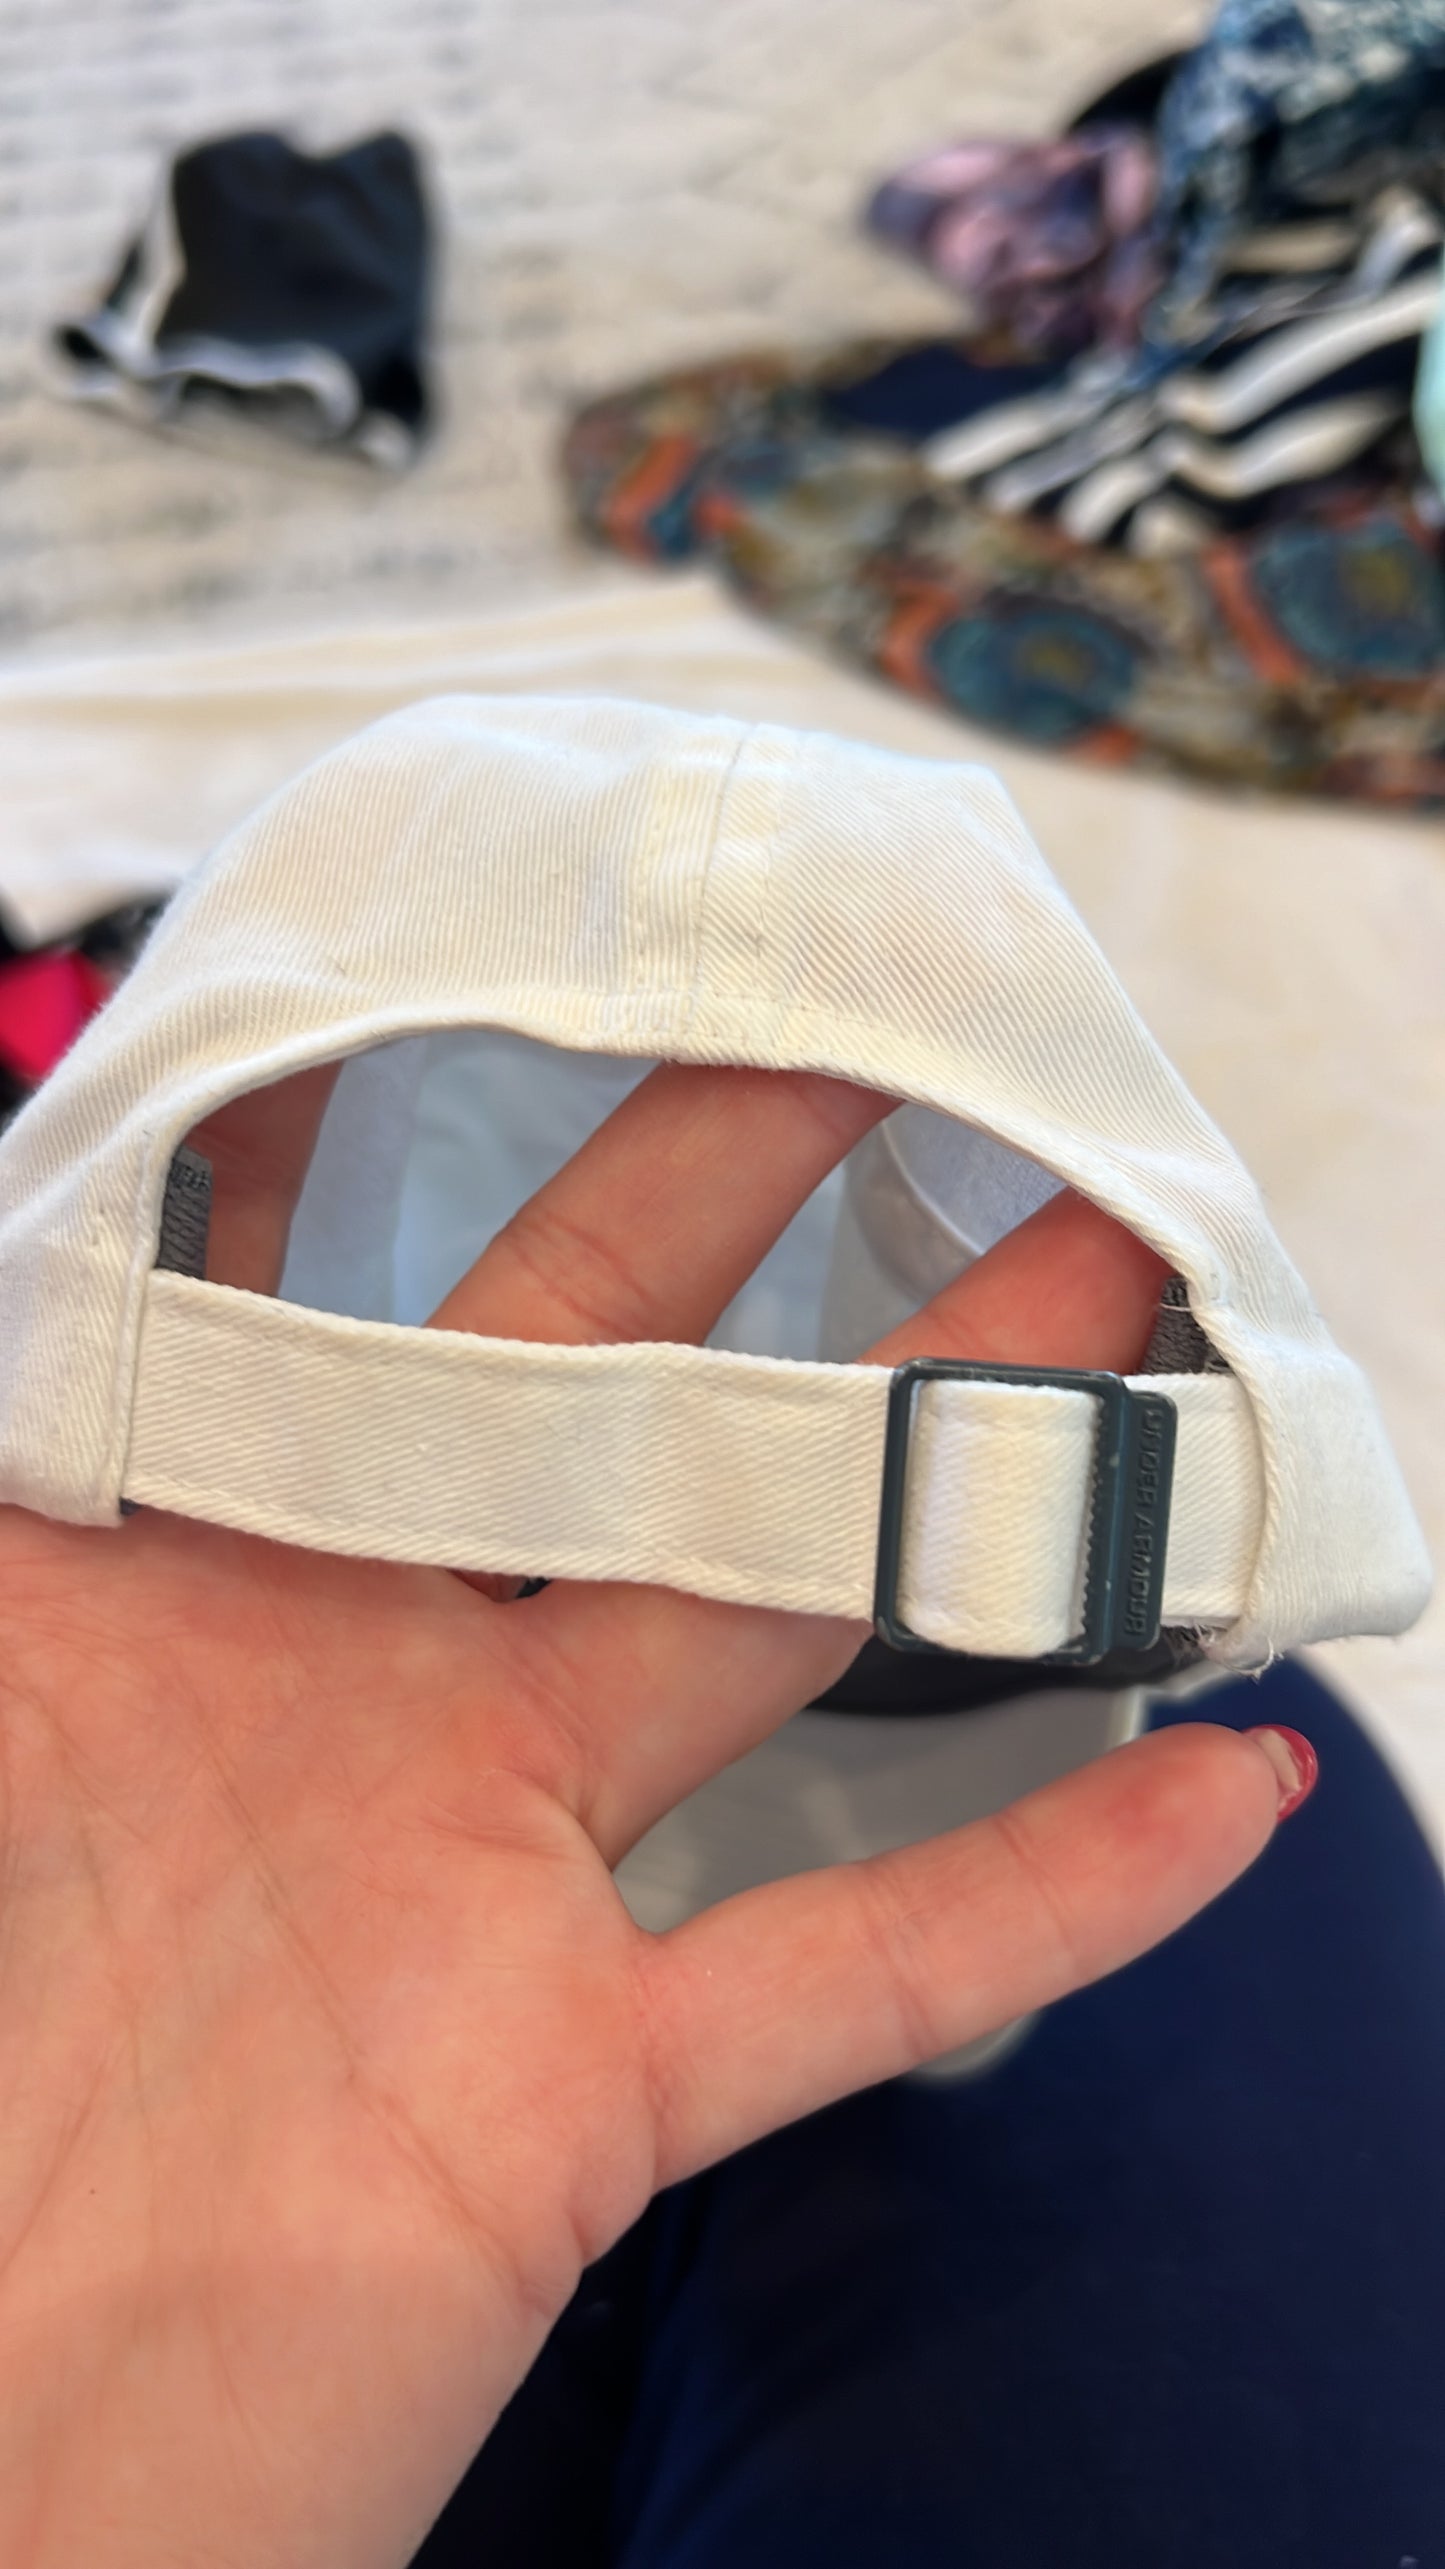 Toddler UA hat 1-3 years, very faint spot, adjustable back